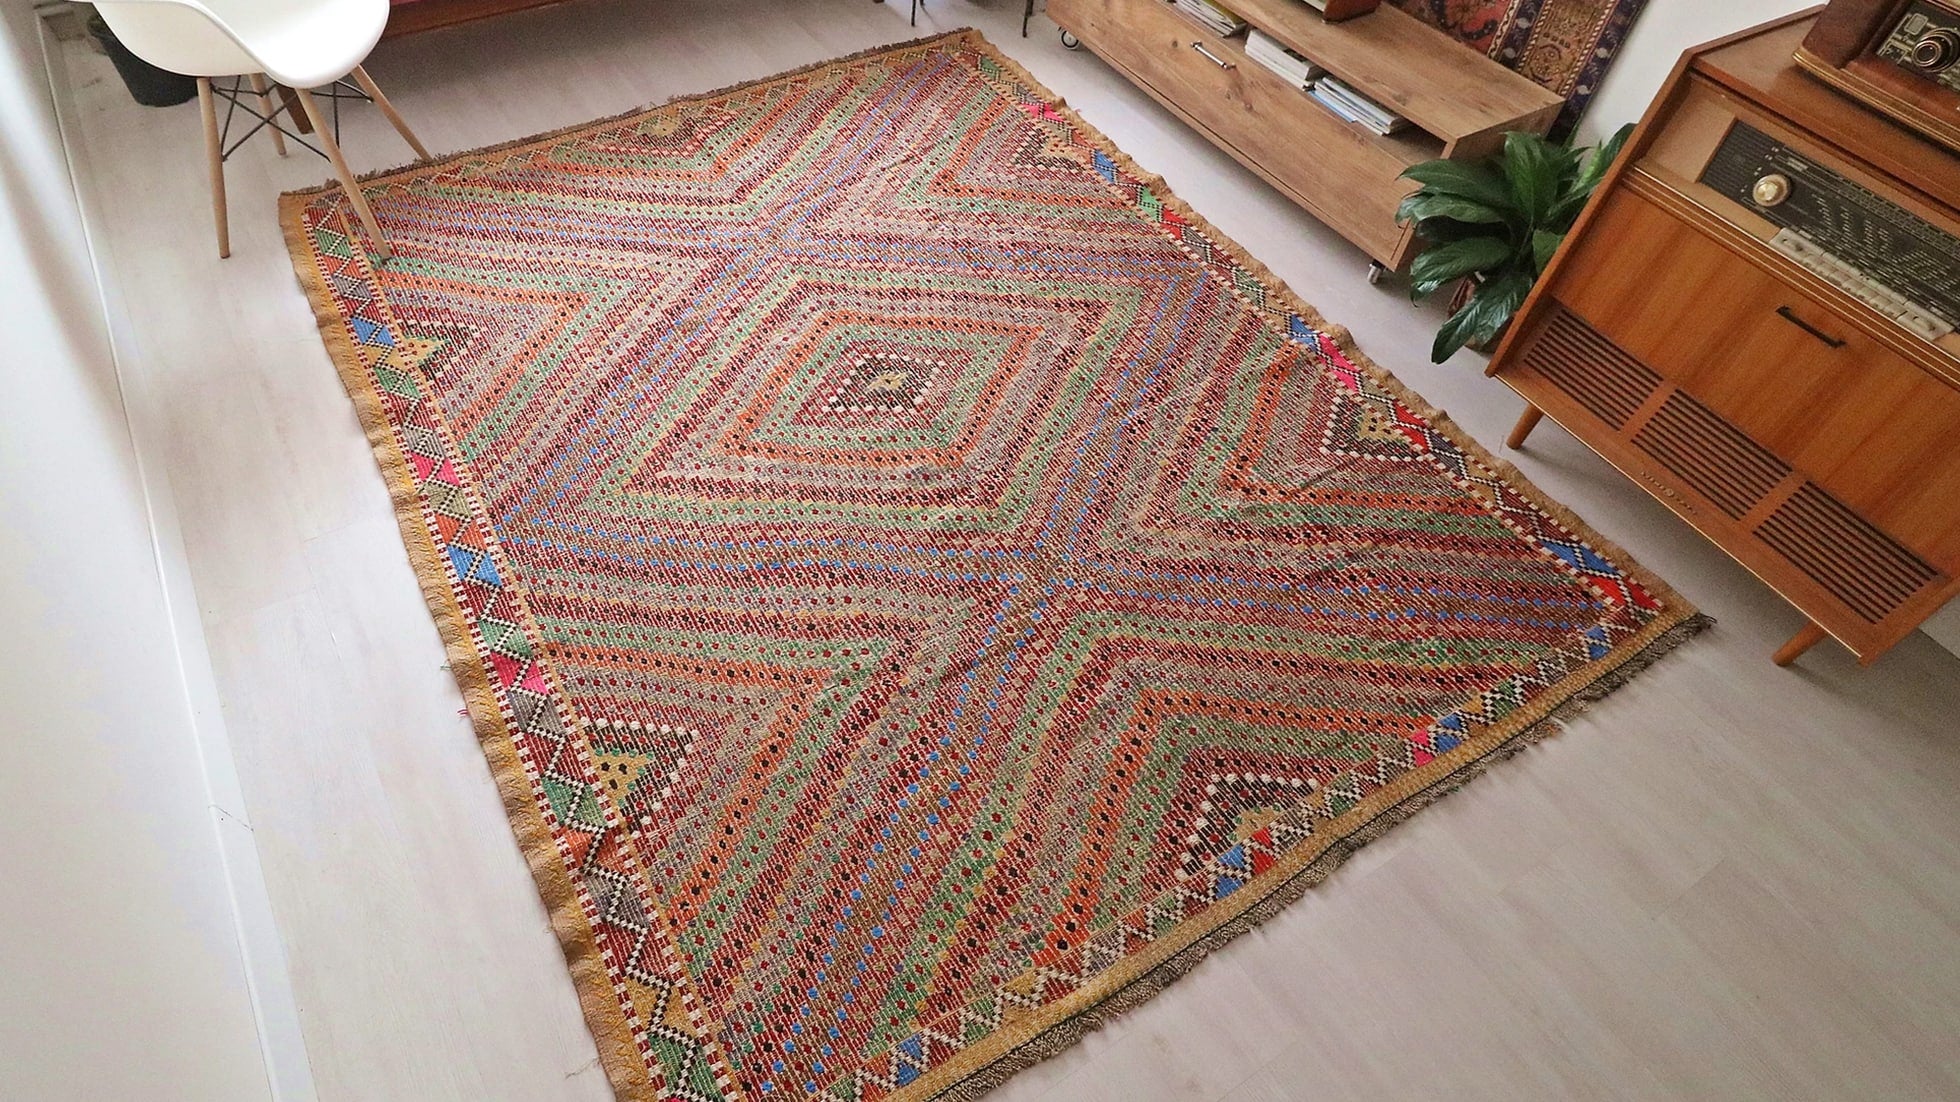 muted hand-knotted vintage Soumak Turkish Kilim Rug in earthy tones